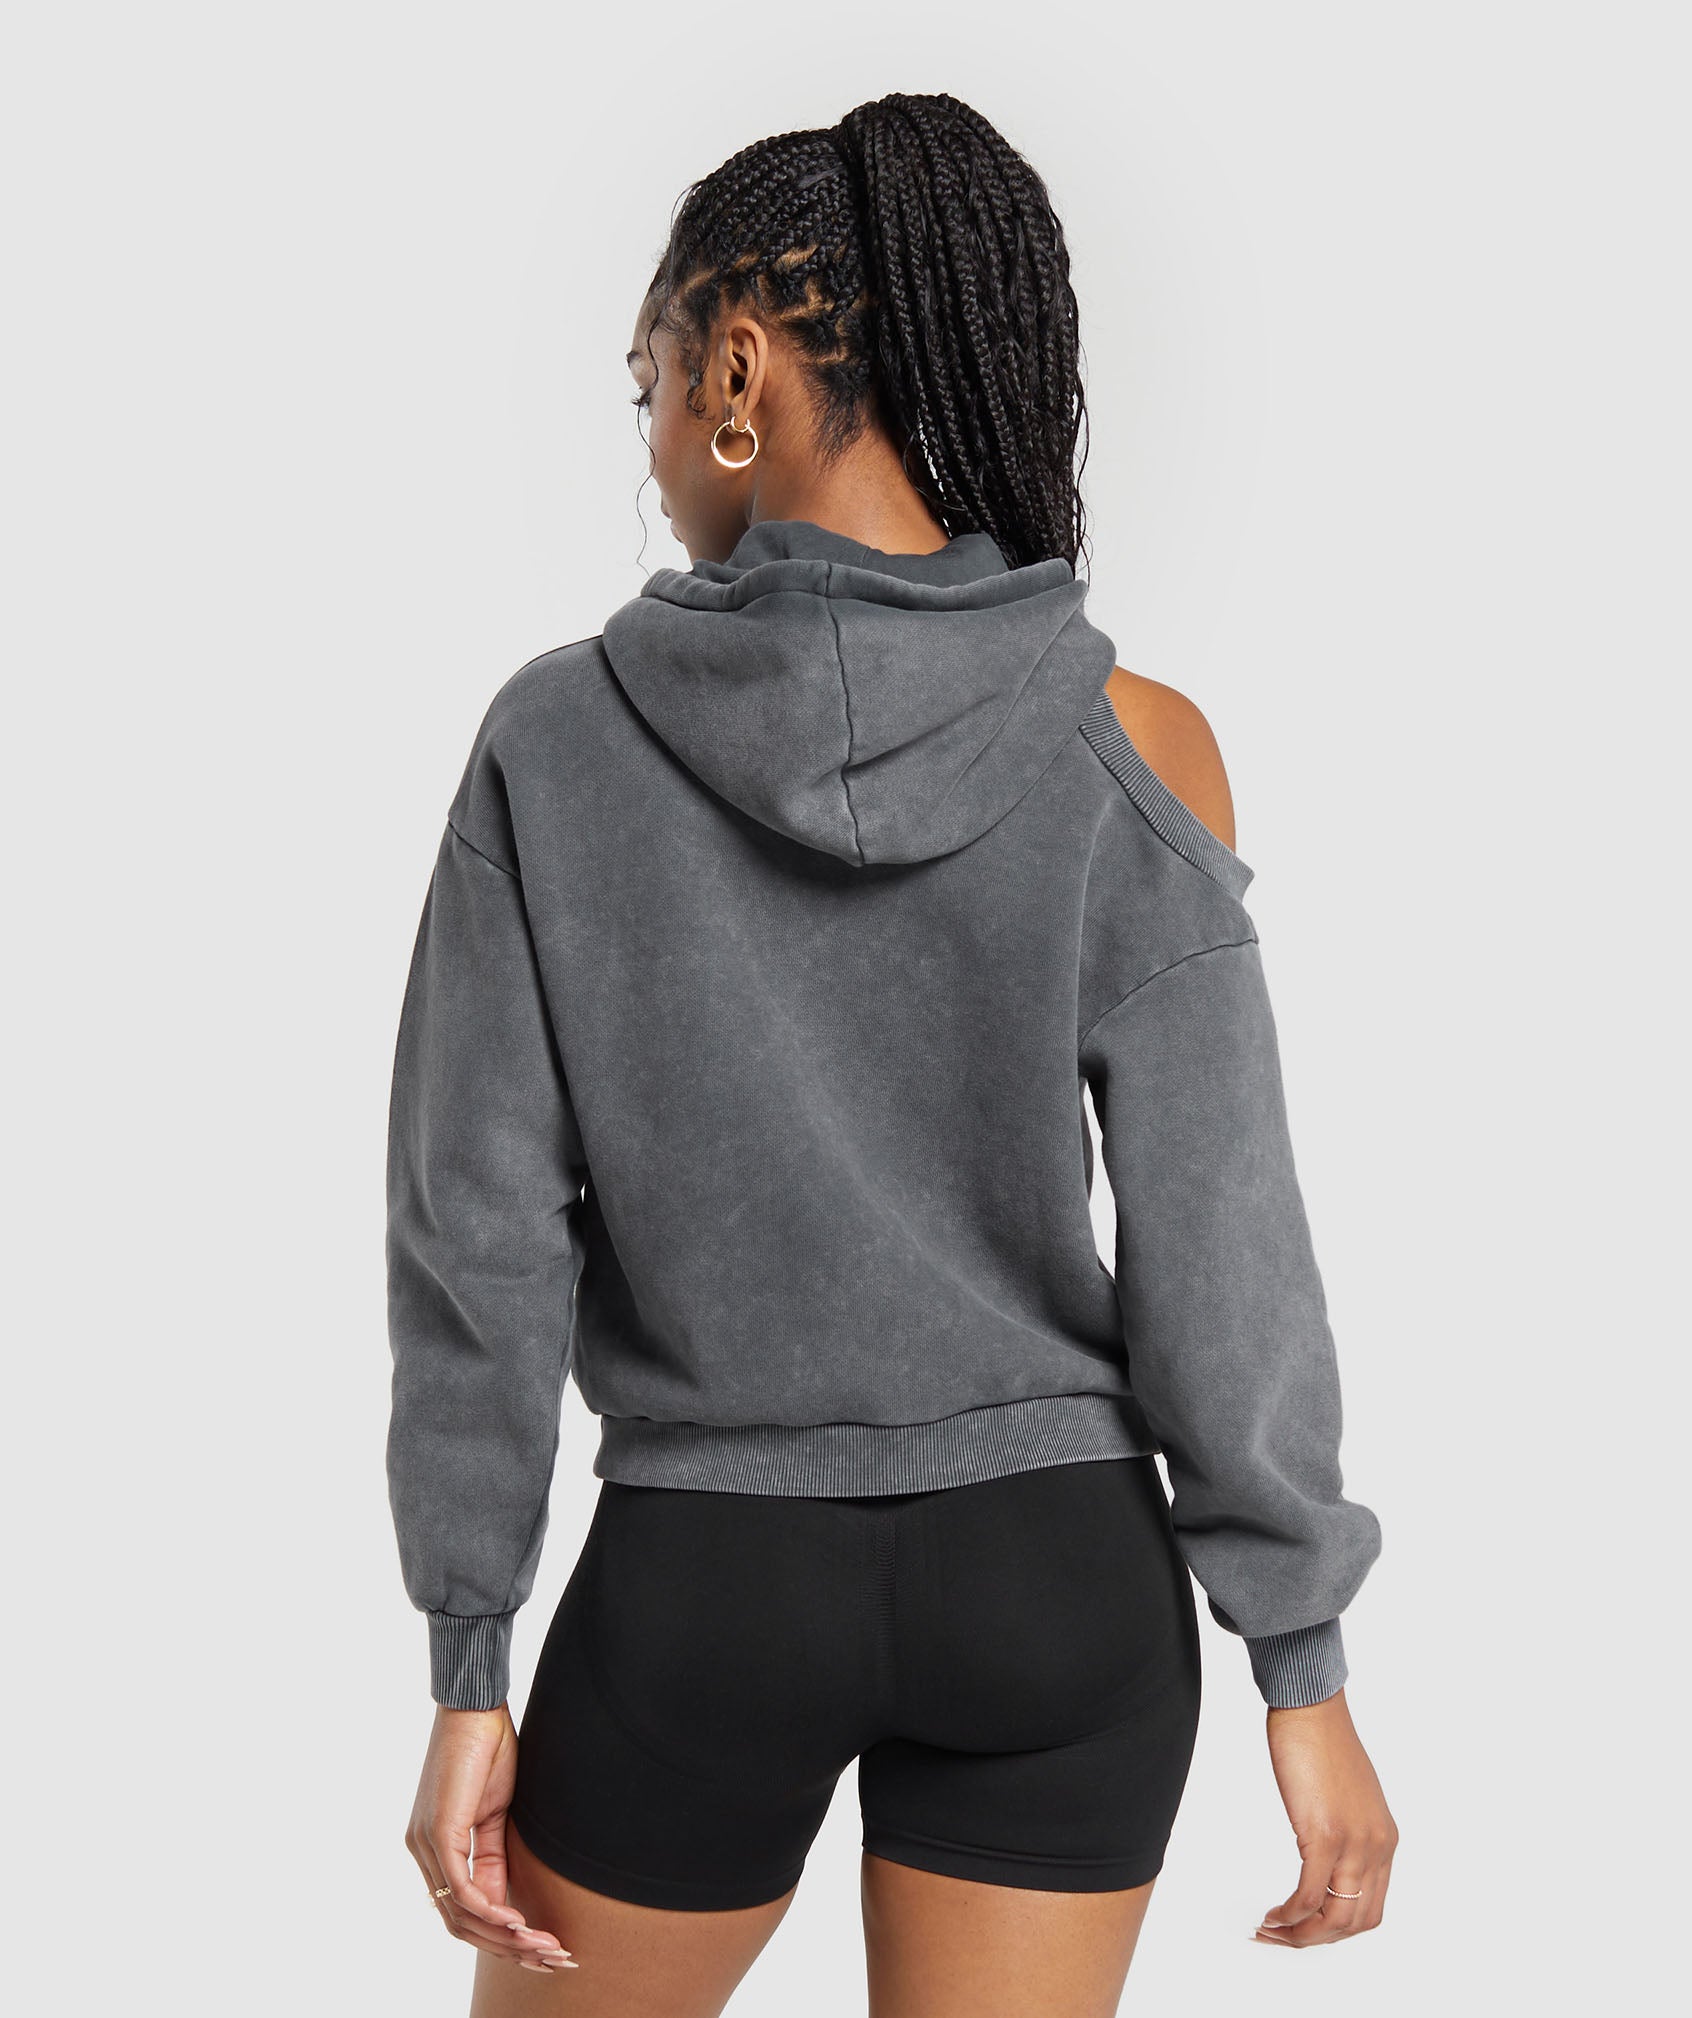 Women's Hoodies - With You From Warm Up to Cool Down